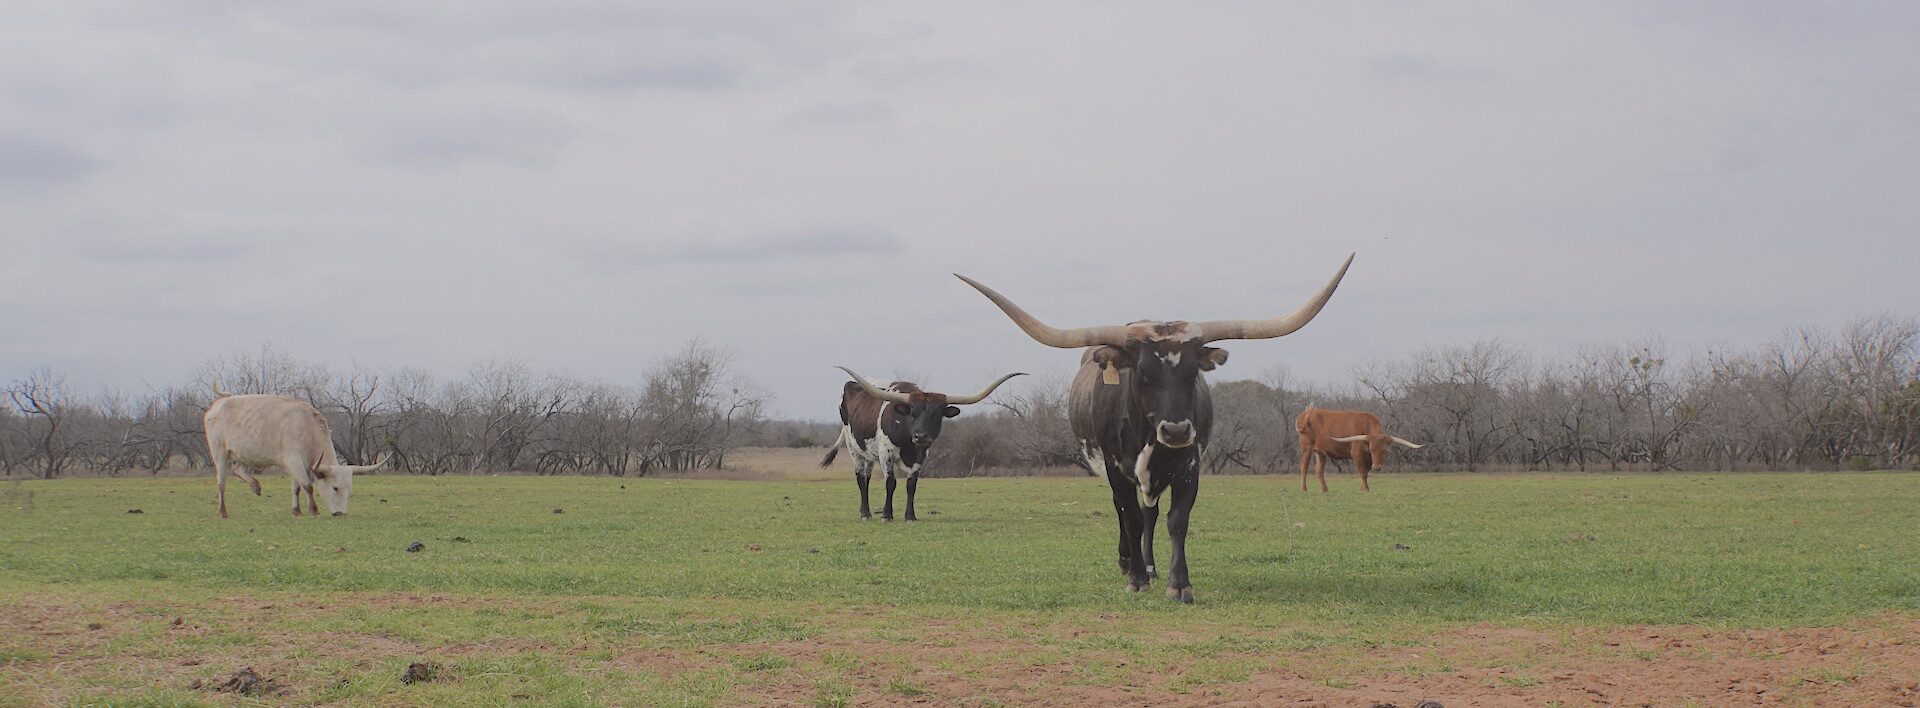 cost of texas longhorn cattle